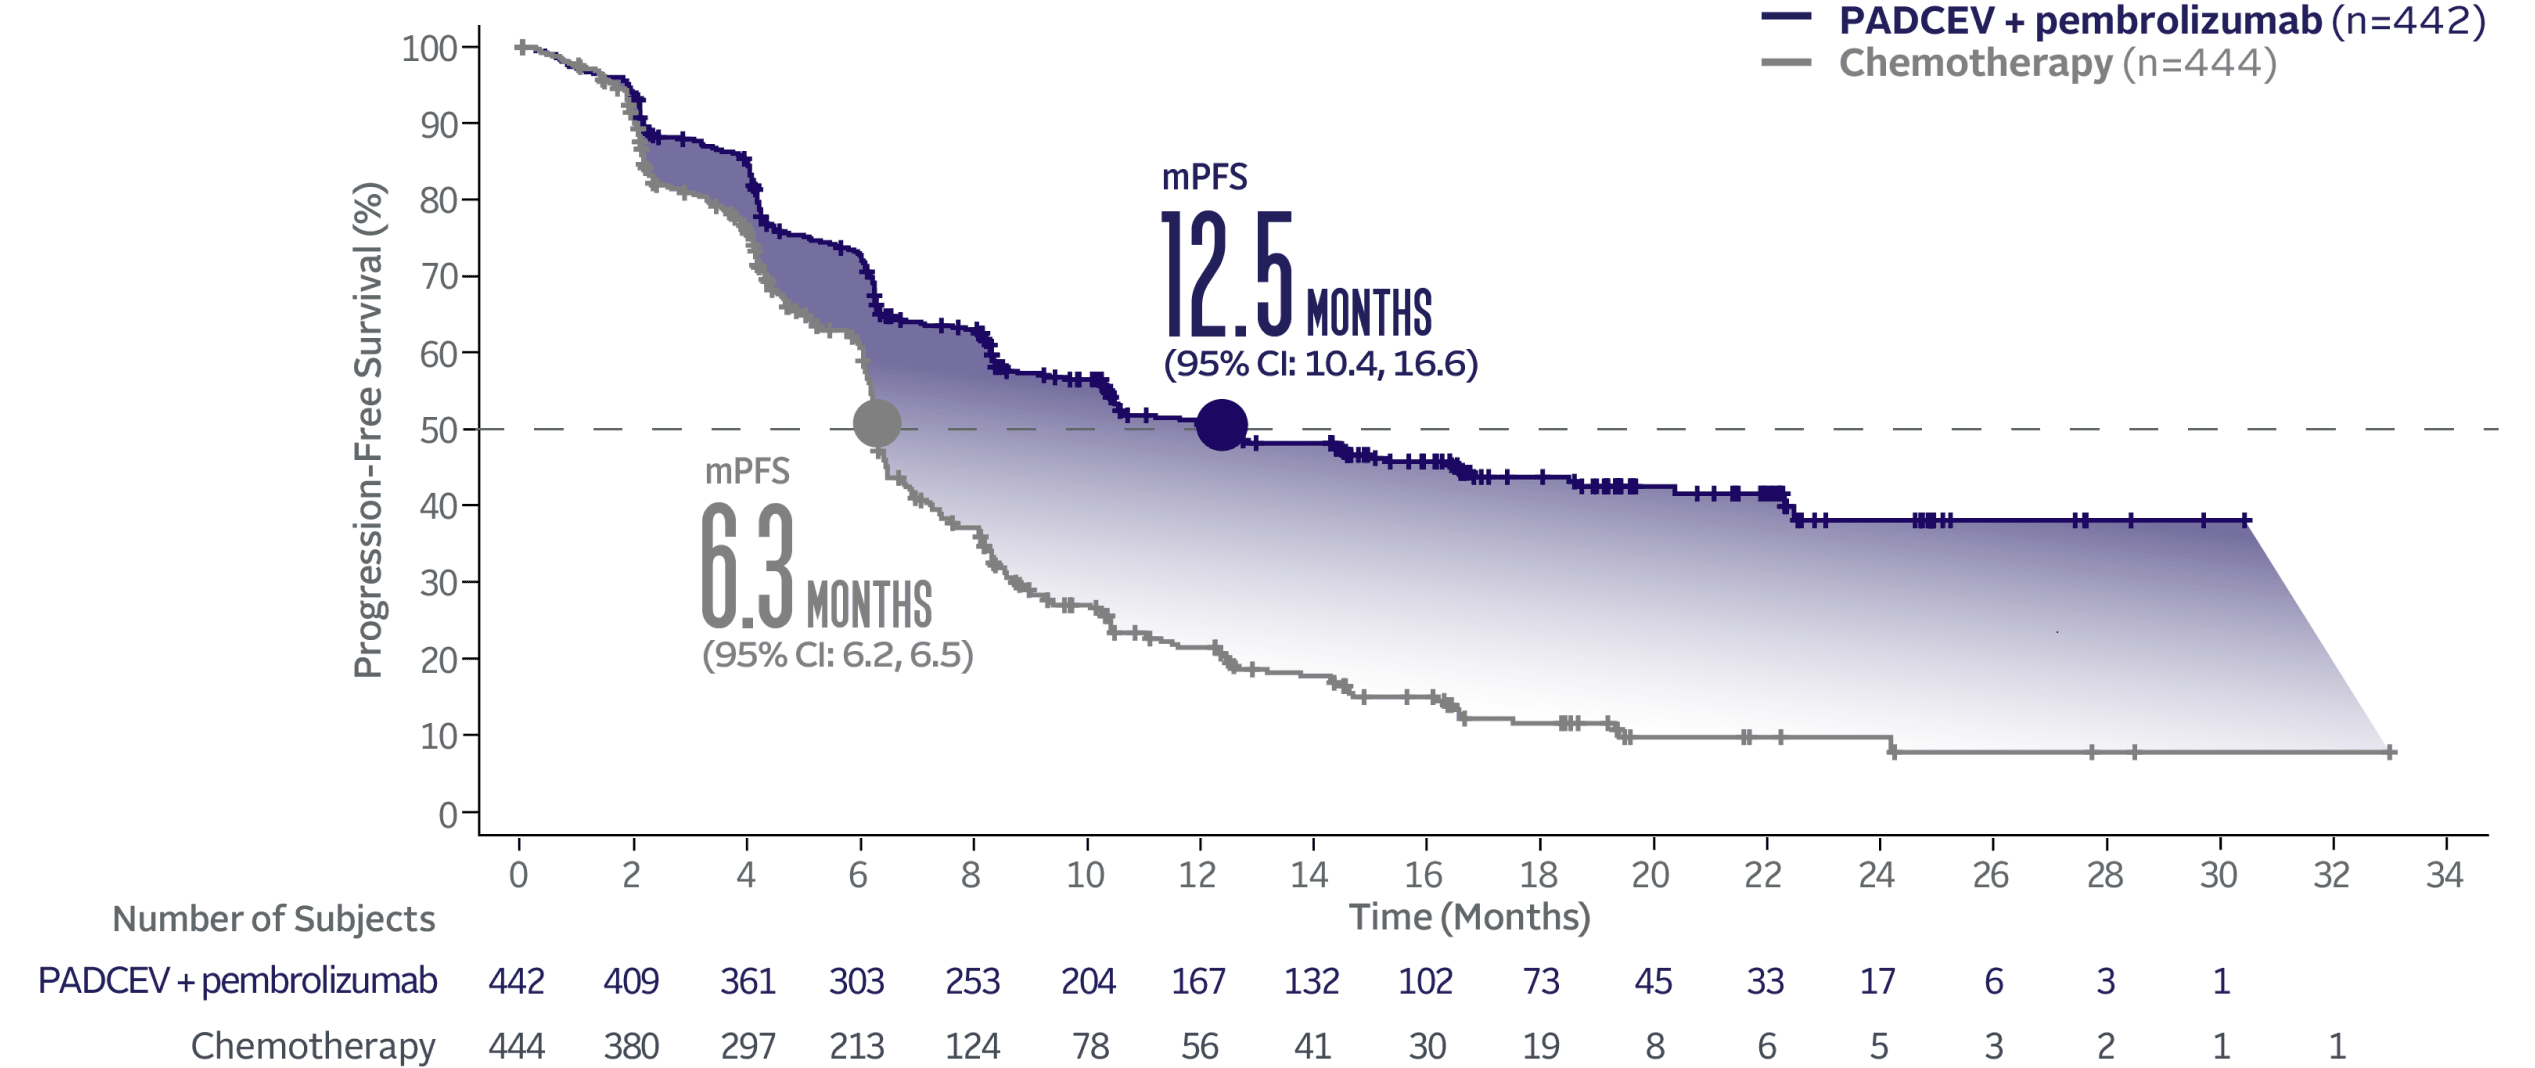 Graph showing 12.5 months median progression-free survival with PADCEV + pembrolizumab and 6.3 months median progression free survival with chemotherapy.